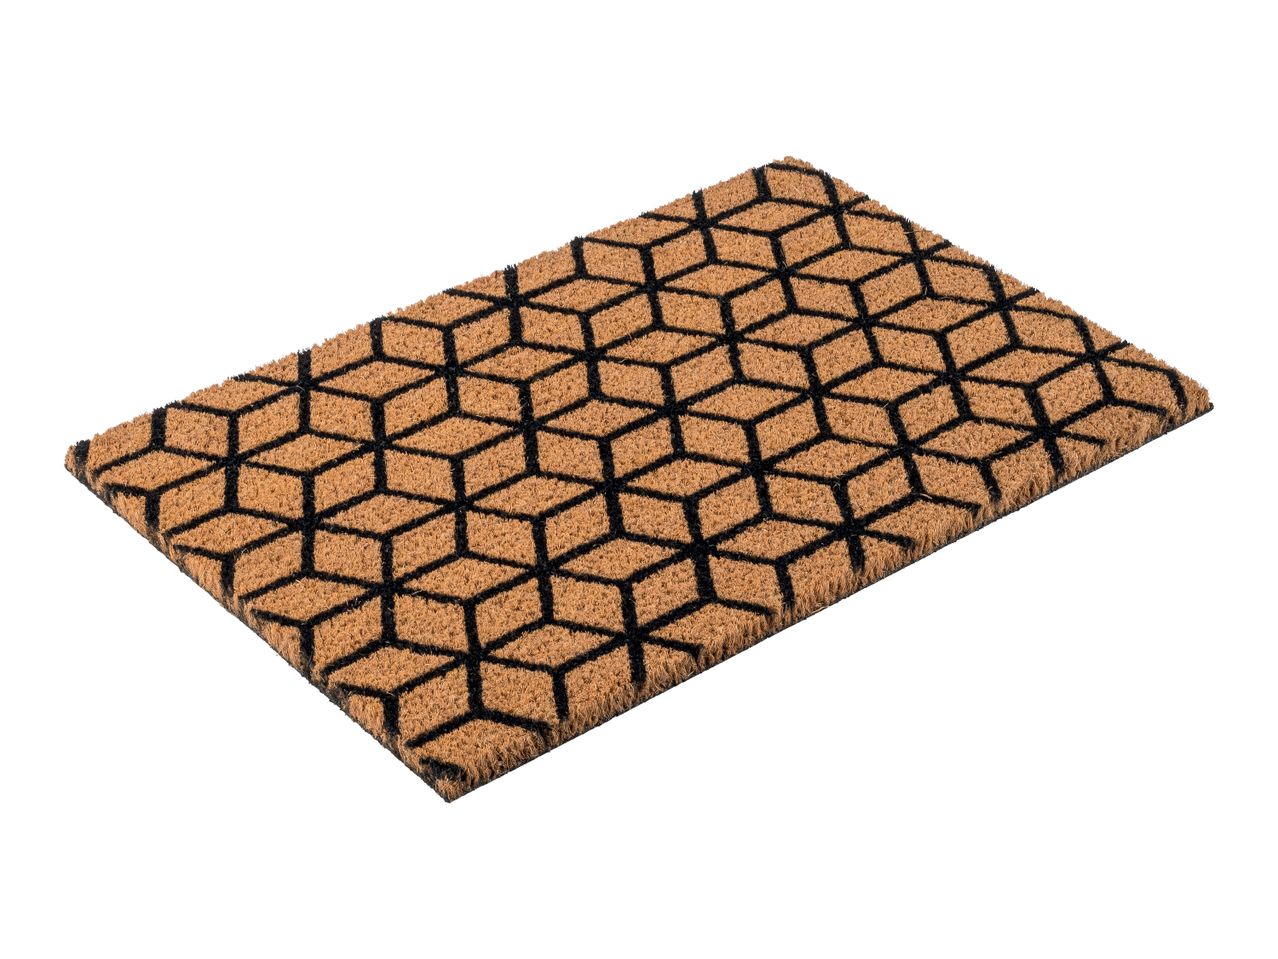 Go to full screen view: Livarno Home Coir Doormat Assorted Designs - Image 5